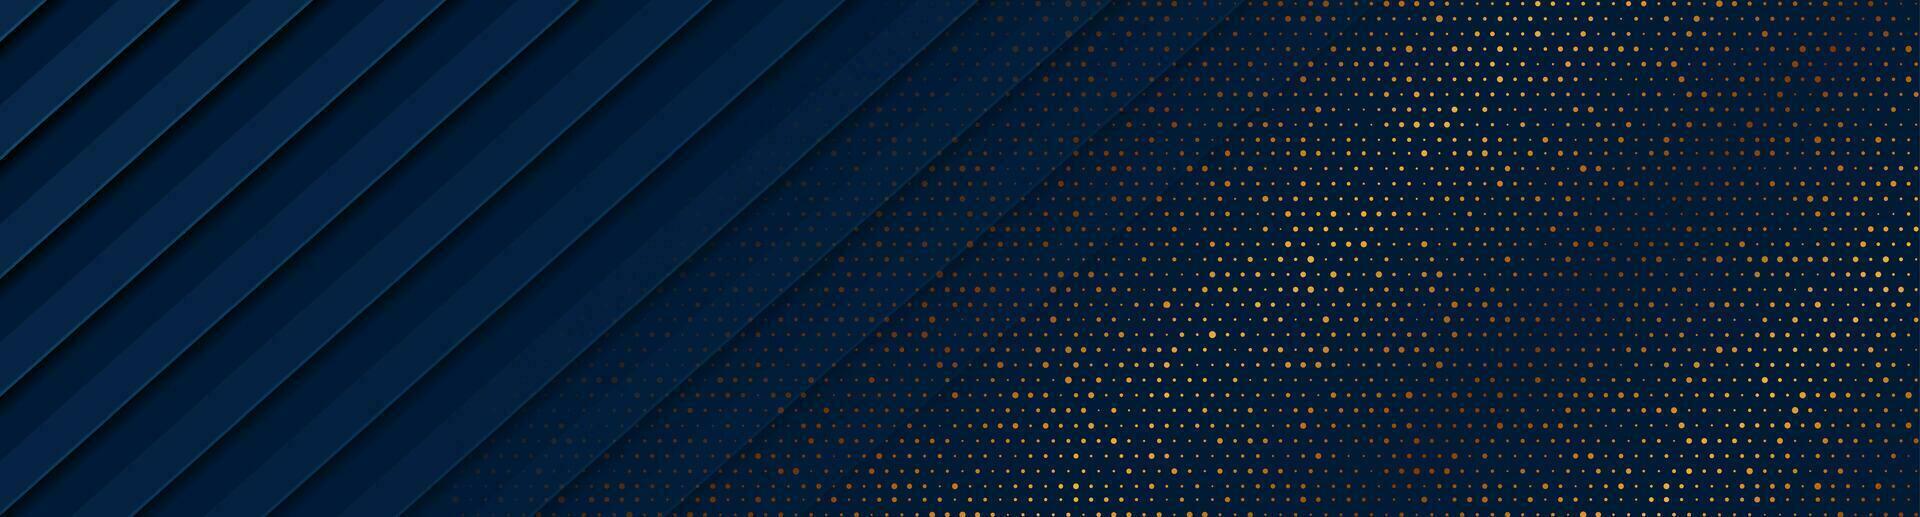 Dark blue and golden abstract tech geometric background vector